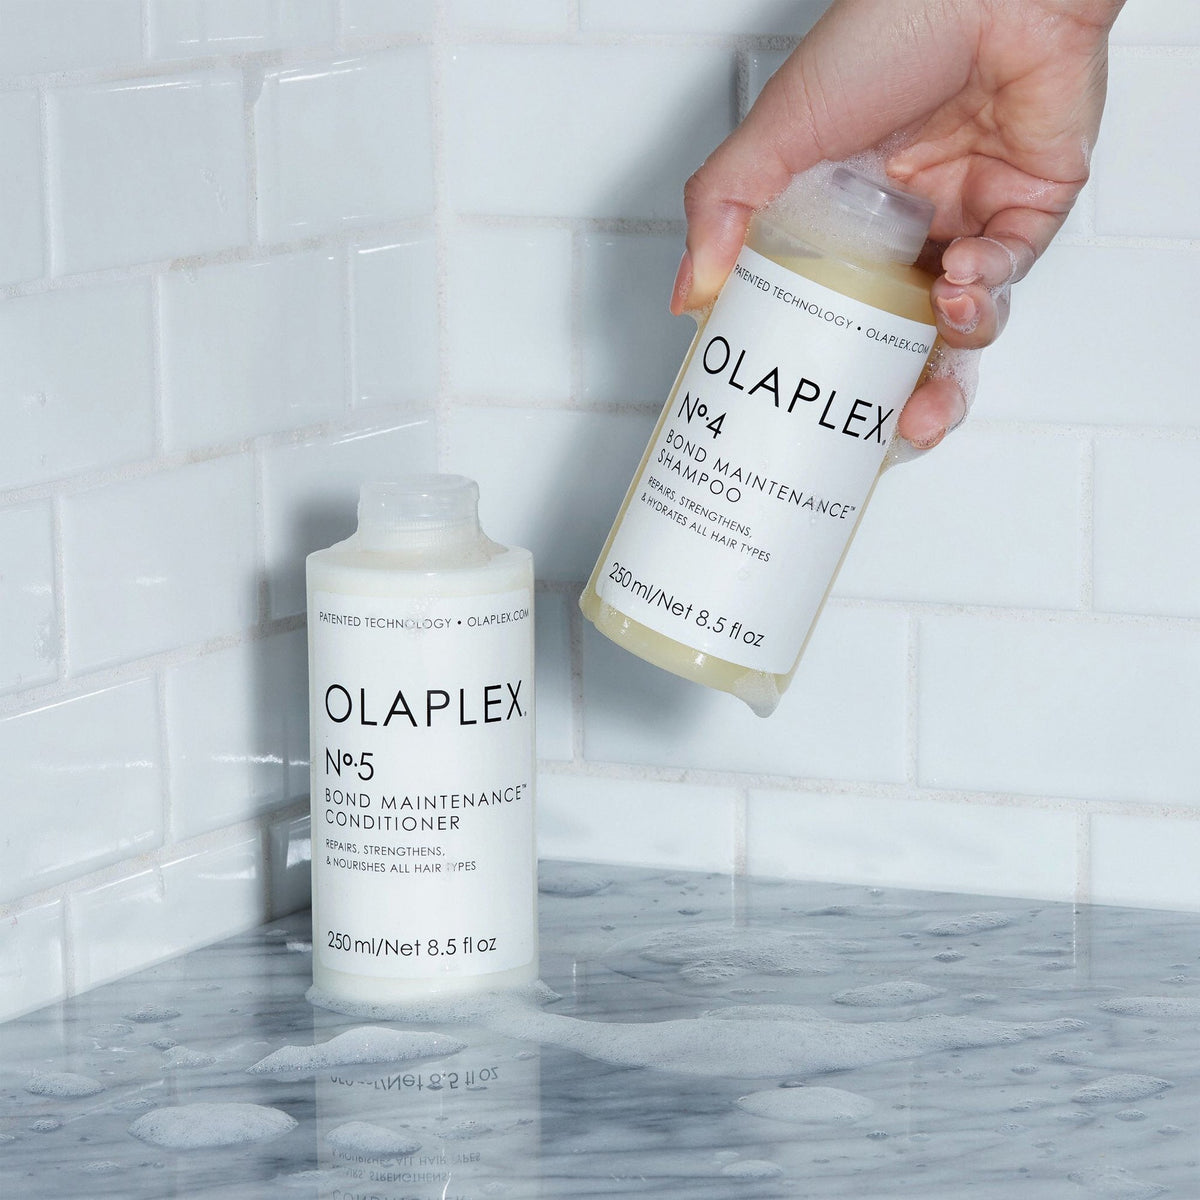 DAILY CLEANSE & CONDITION DUO